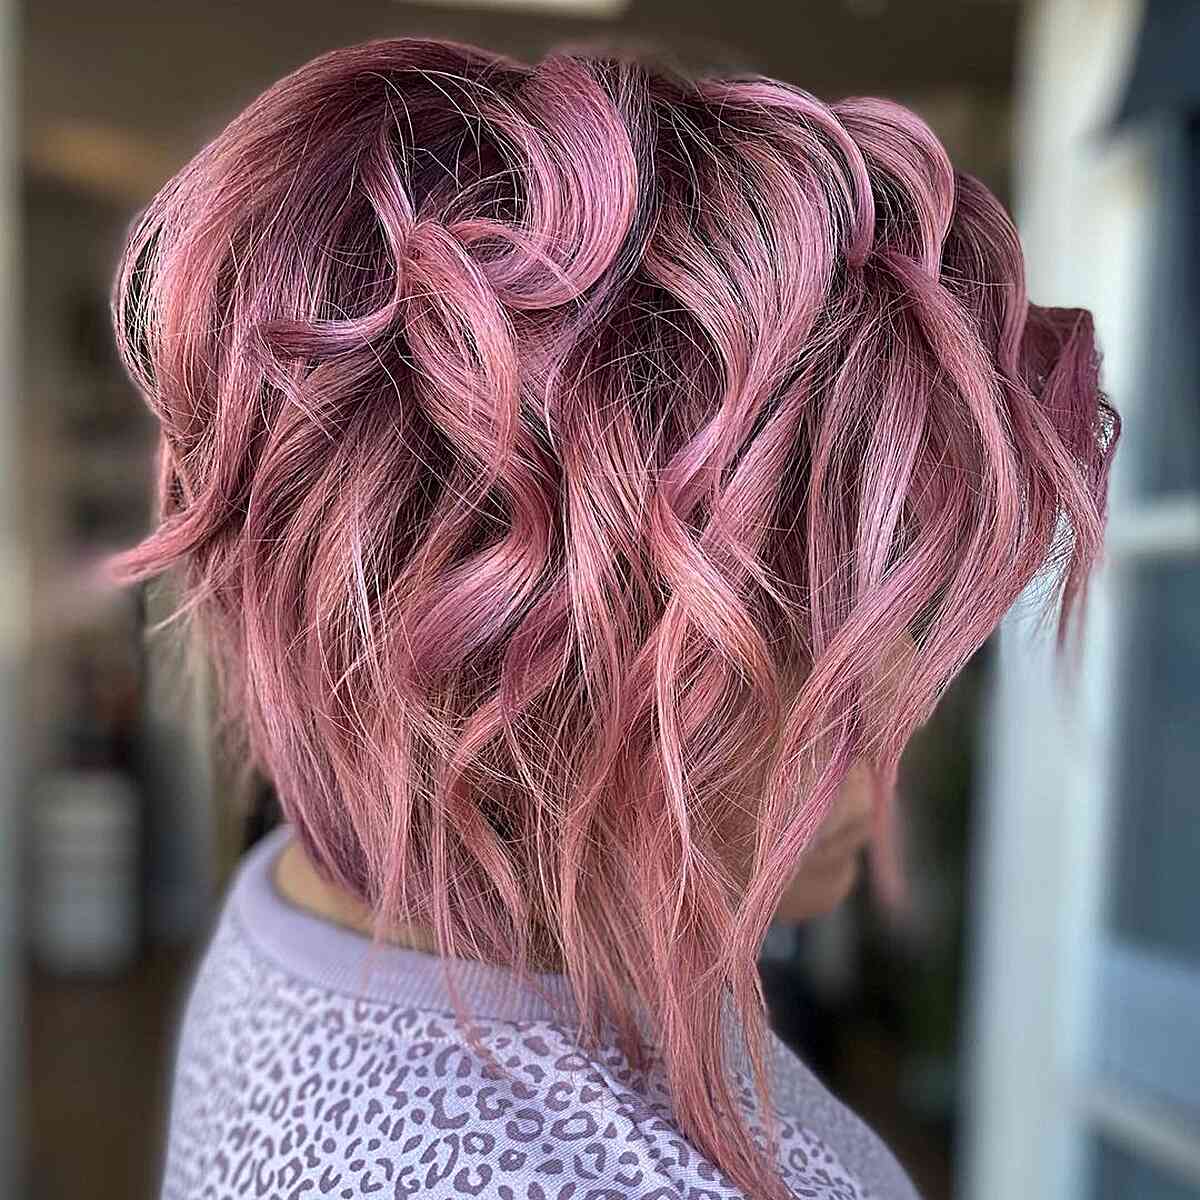 Messy Layered Pink Hair with Dark Roots for women with choppy ends